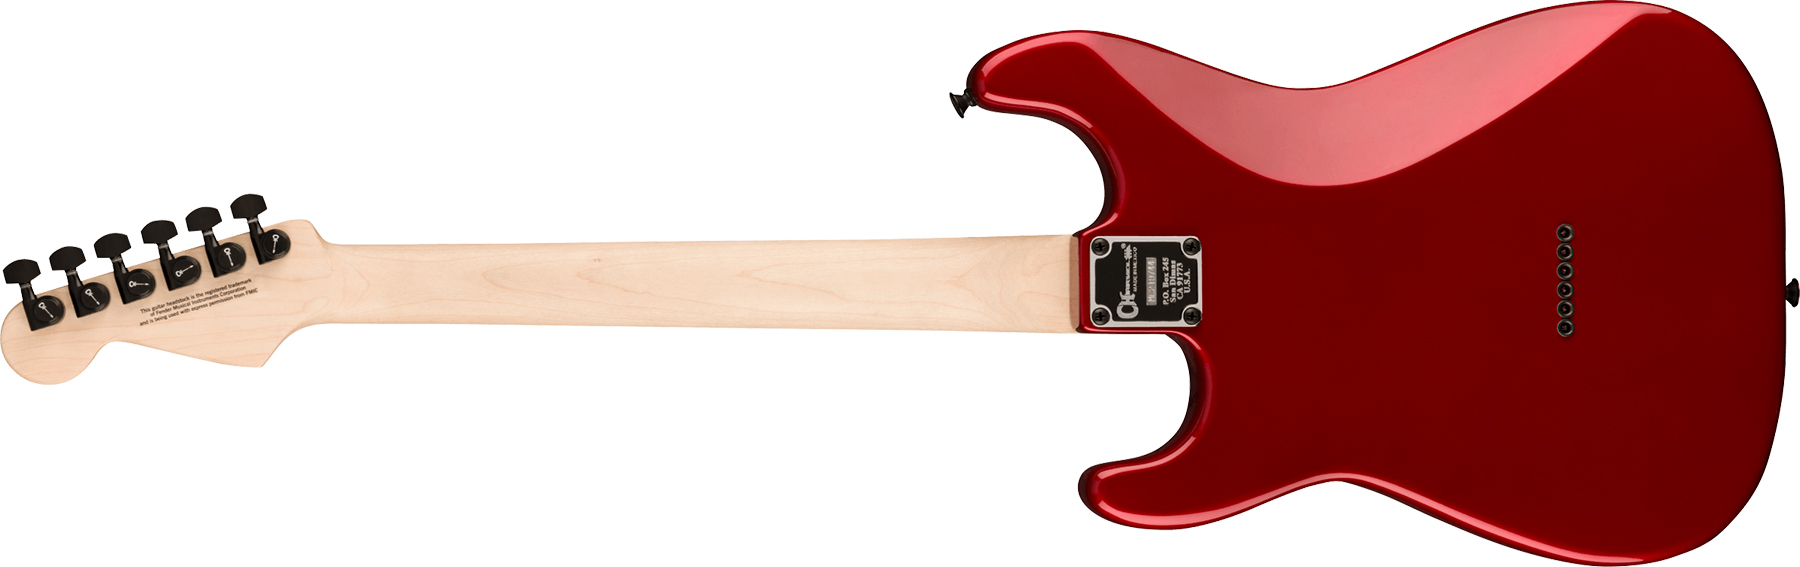 Charvel So-cal Style 1 Hh Ht E Pro-mod 2h Seymour Duncan Eb - Candy Apple Red - Str shape electric guitar - Variation 1